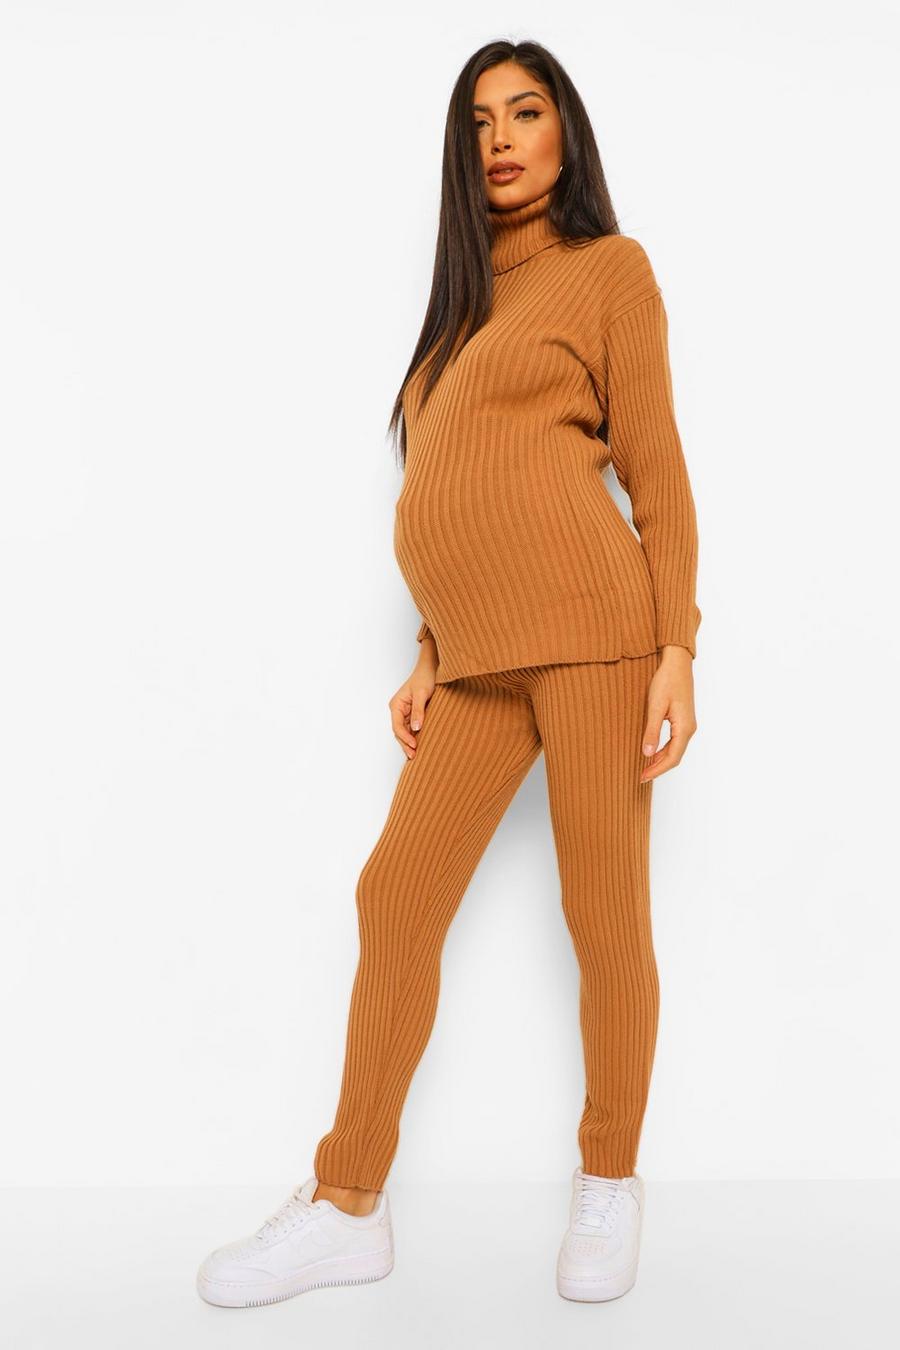 Camel beige Maternity Jumper And Legging Knitted Rib Co-Ord